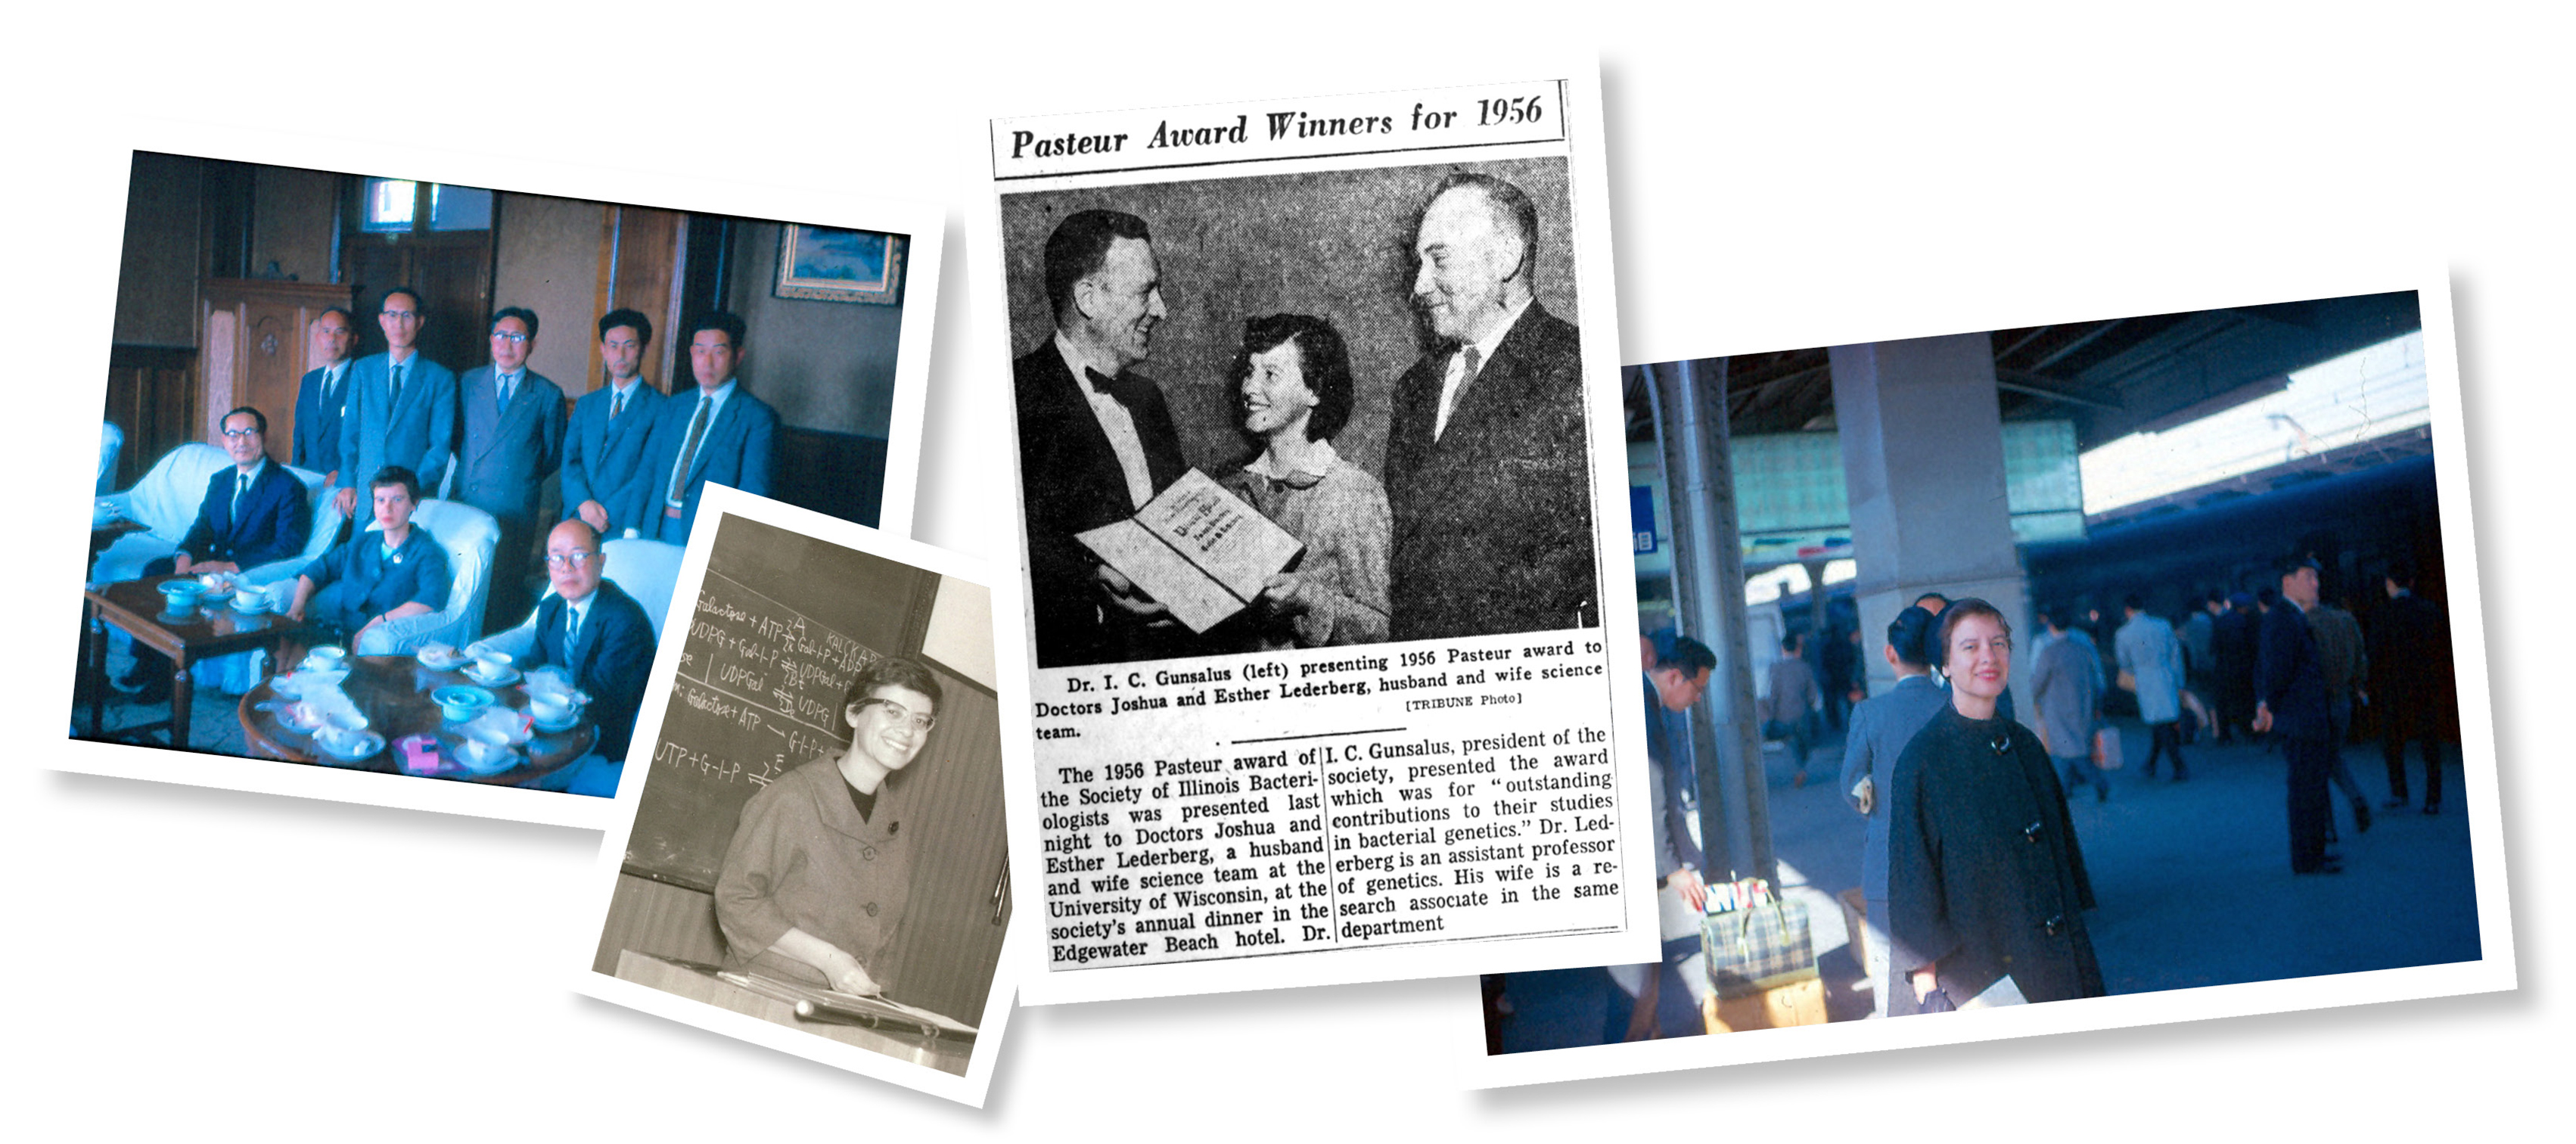 It was common for Lederberg to be one of few women present at scientific meetings (Photographs courtesy of the Esther M. Zimmer Lederberg Memorial Website)